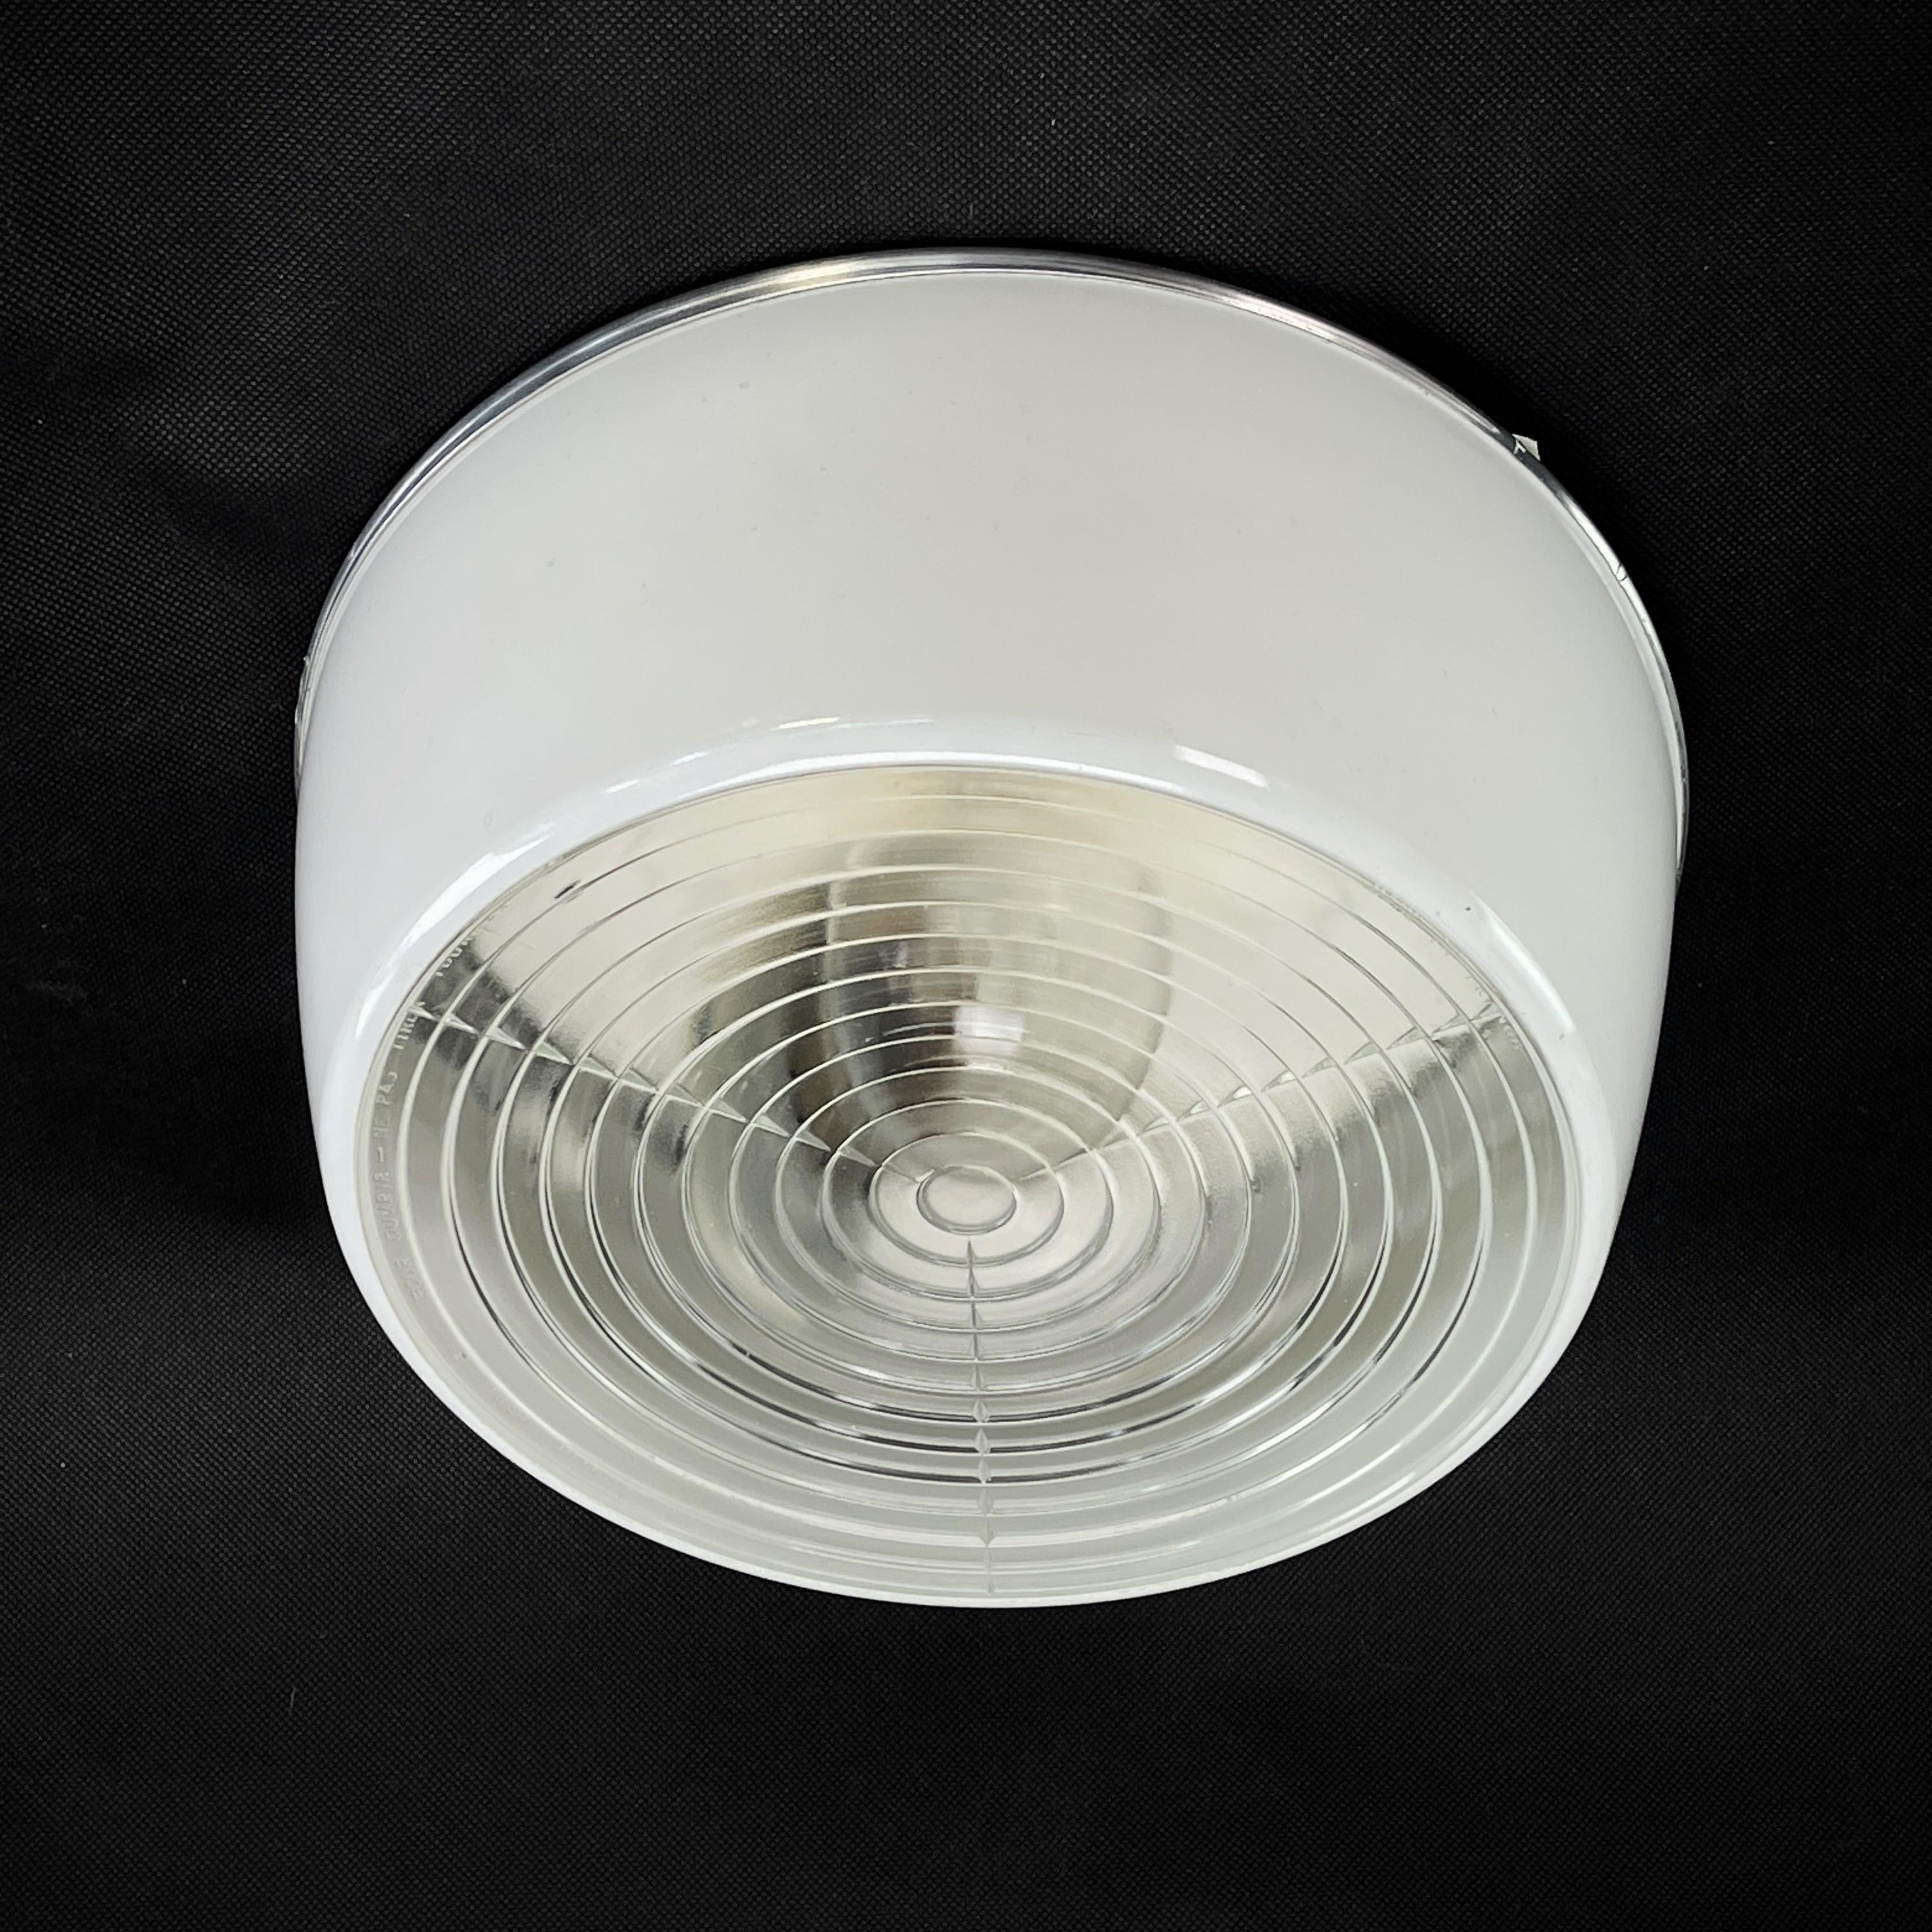 Art Deco ceiling or wall light - 1920s-1930s

This rare, original pendant lamp captivates with its simple and sober Art Deco design. The signed lamp gives a very pleasant light. This ceiling lamp is an absolute design classic from the ART DECOS